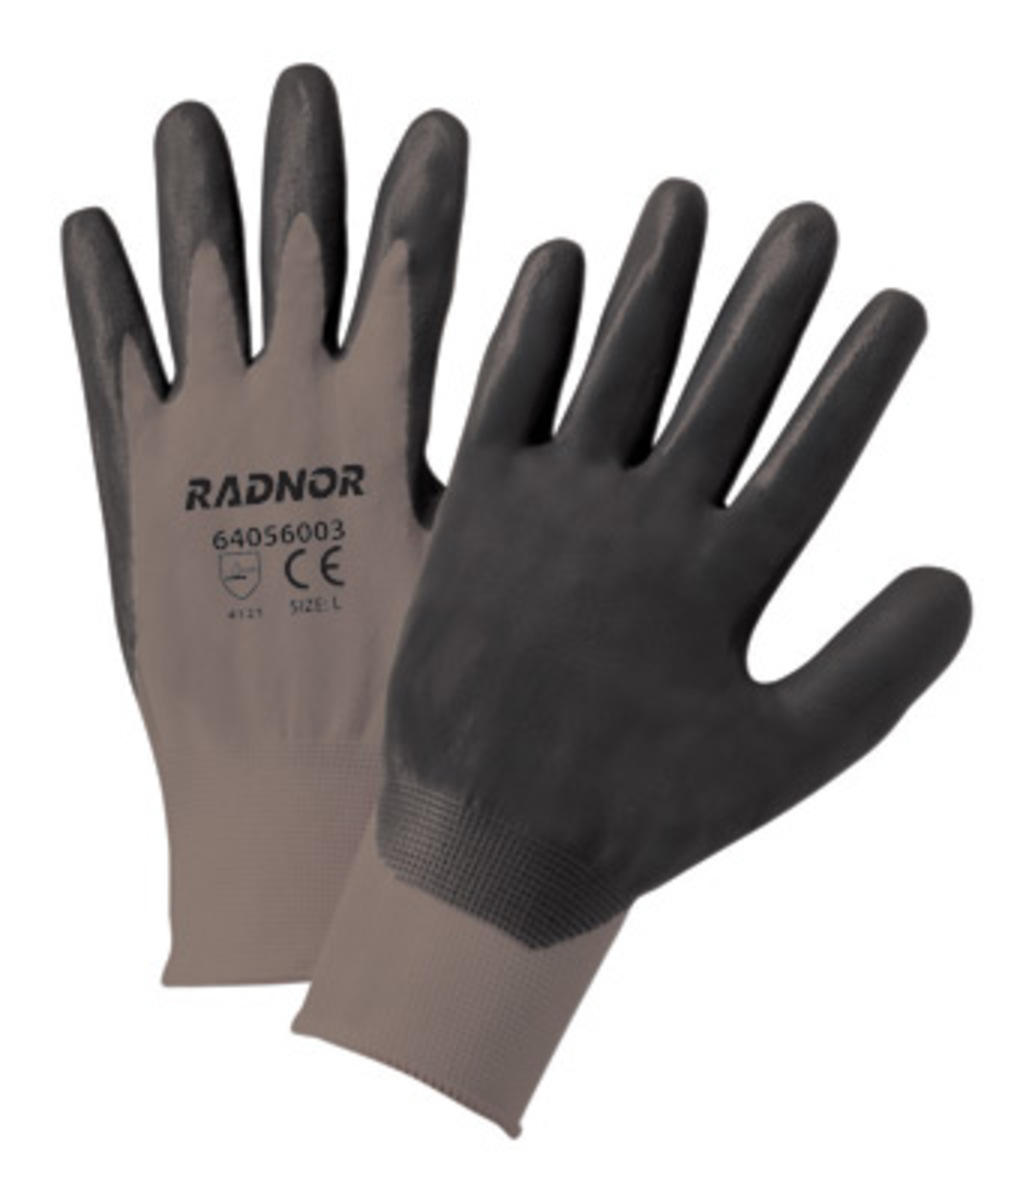 RADNOR® 2X 13 Gauge Black Nitrile Palm And Finger Coated Work Gloves With Gray Nylon Liner And Knit Wrist